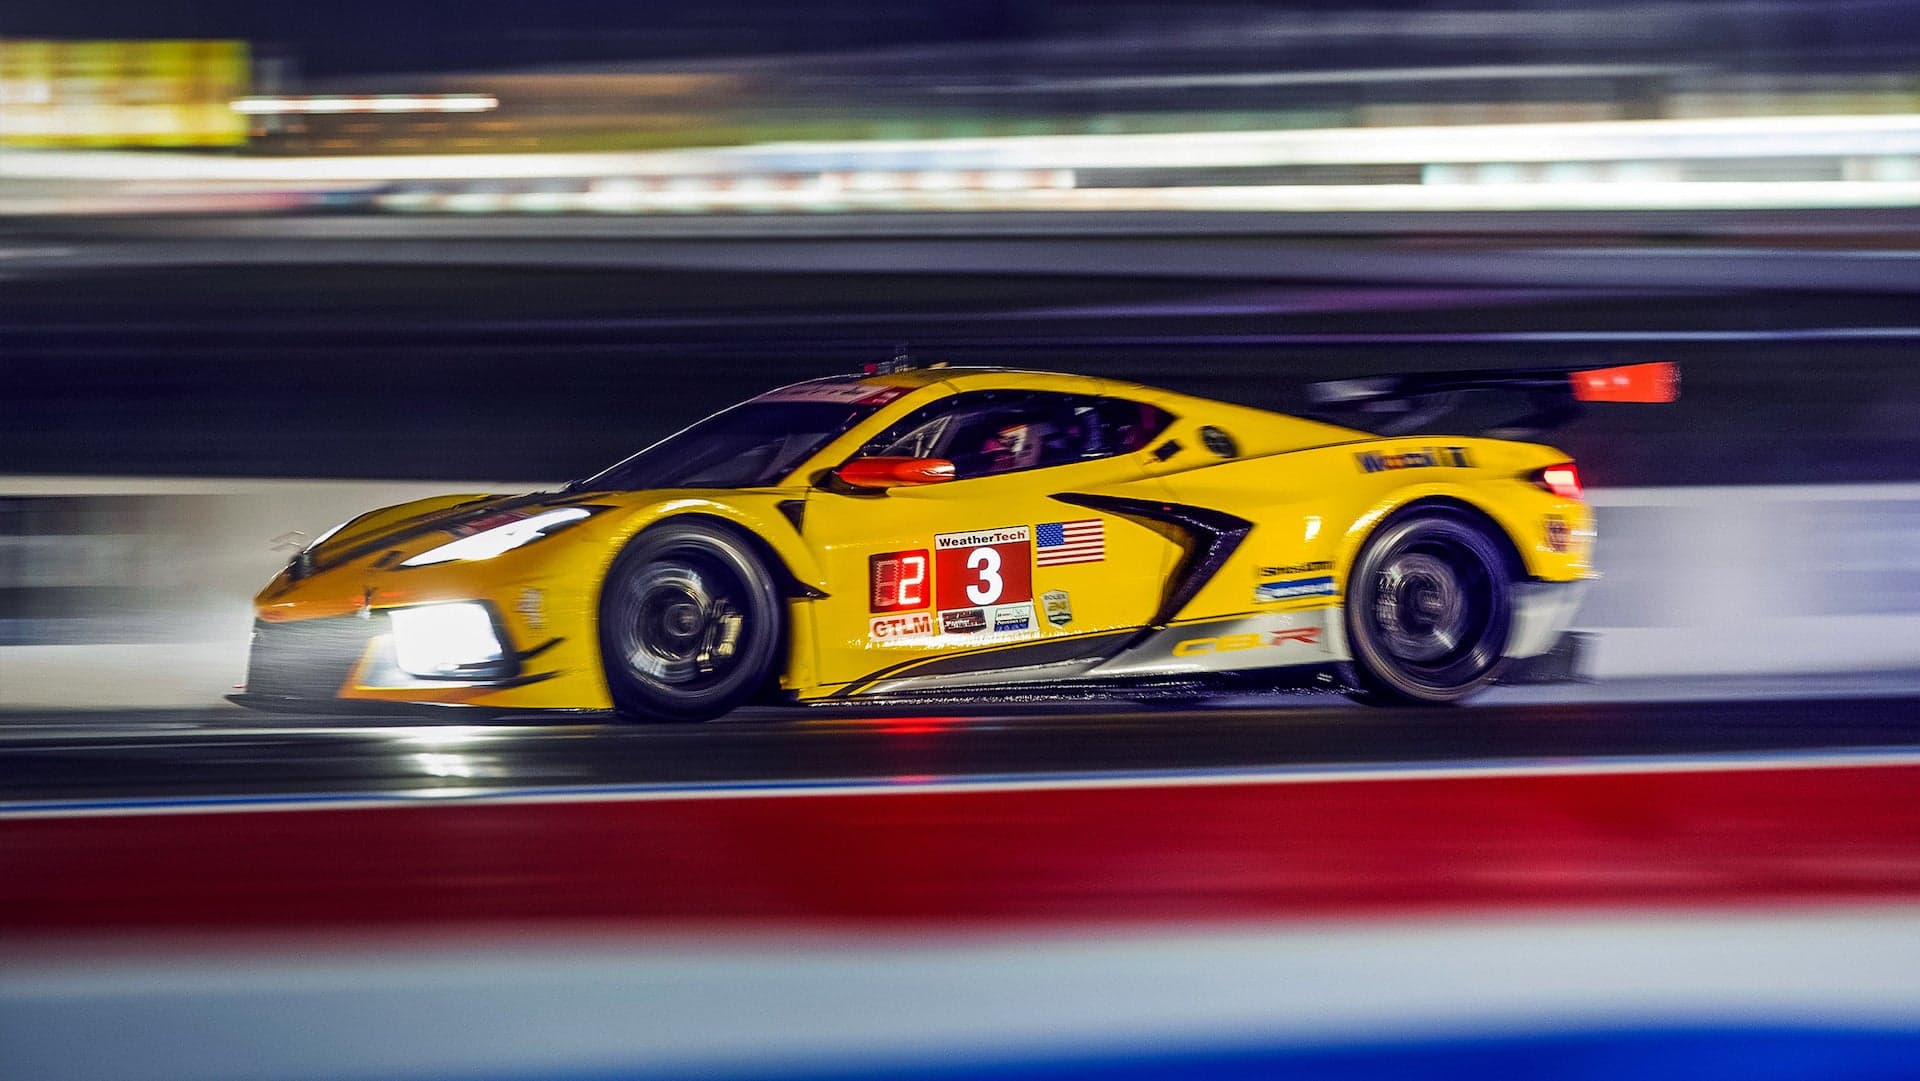 The Chevrolet Corvette C8 Finally Heads to the 24 Hours of Le Mans